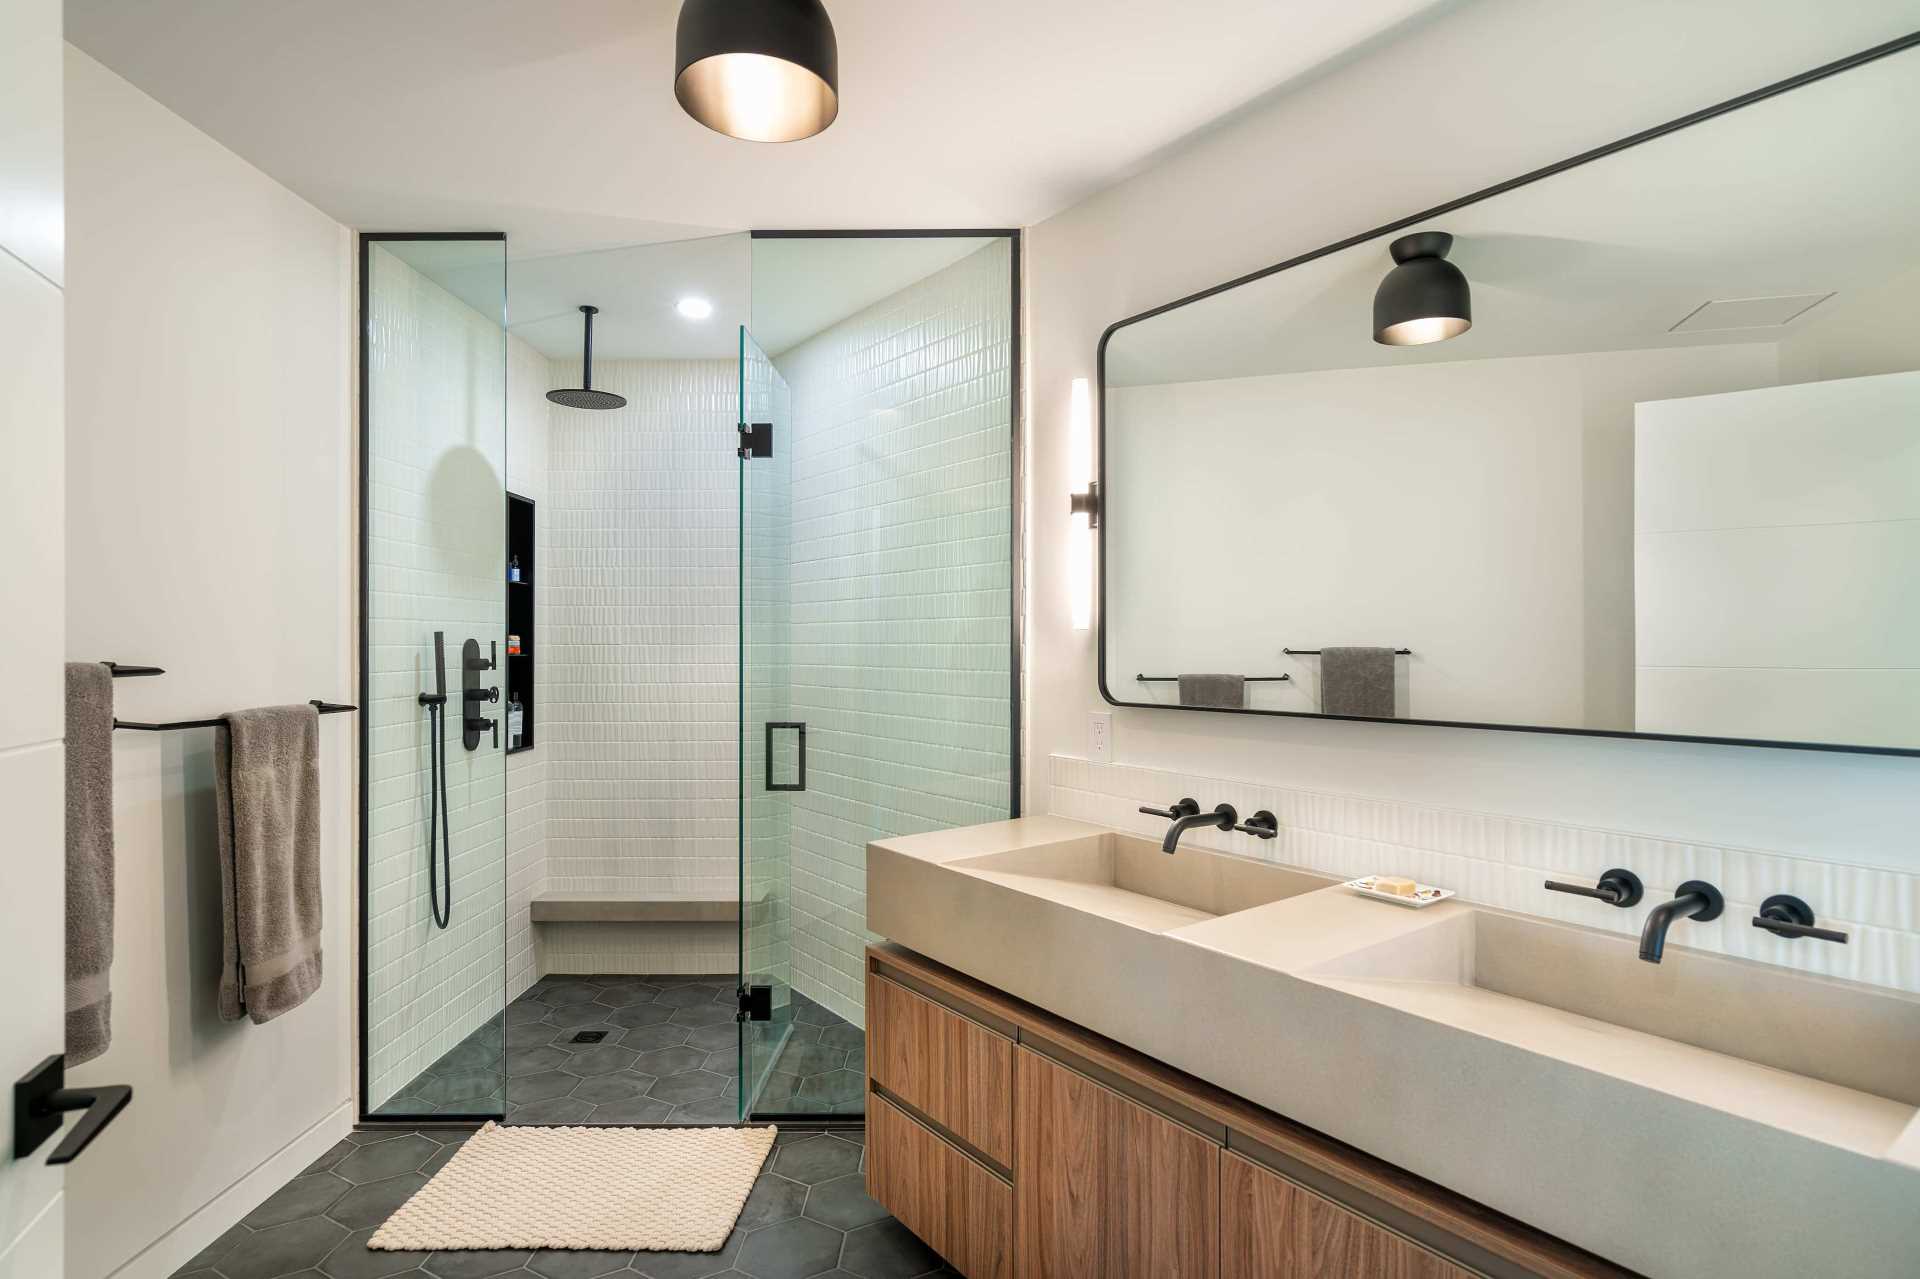 A uniquely shaped angled ensuite includes a walk-in shower with a bench, and a double vanity.